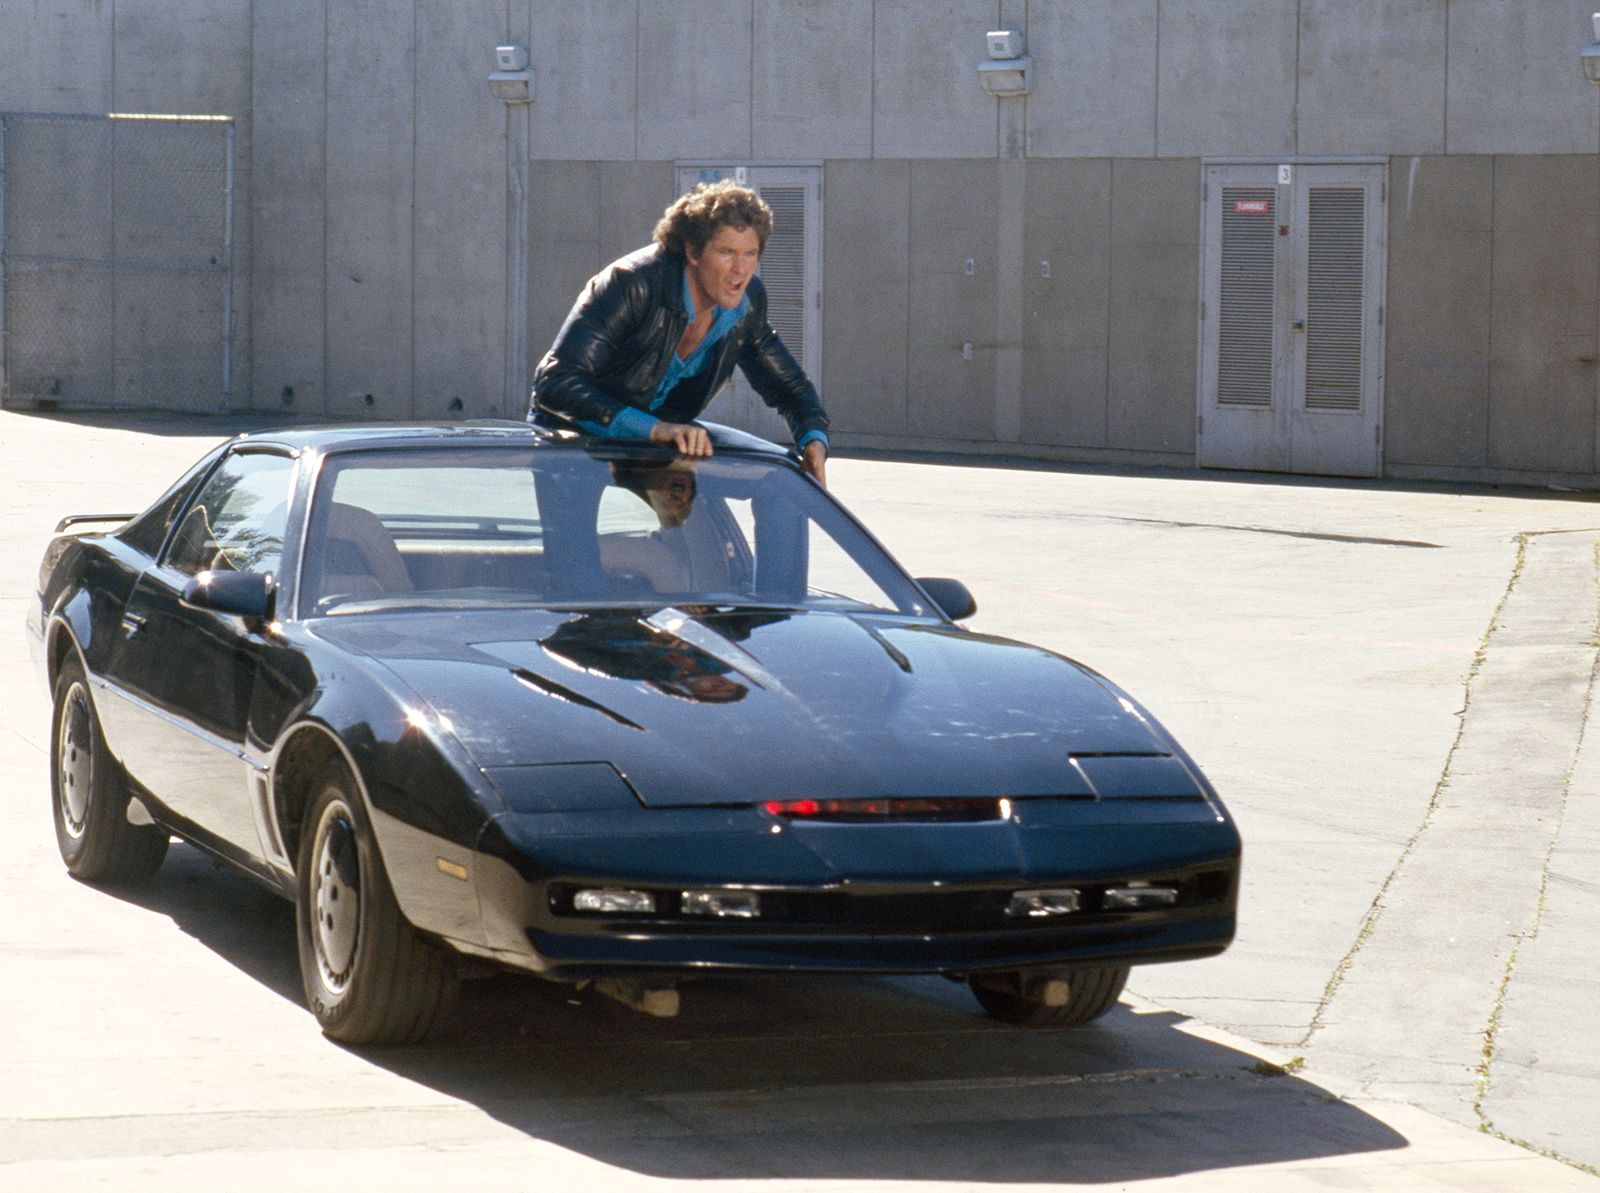 Who owns Knight Rider car?